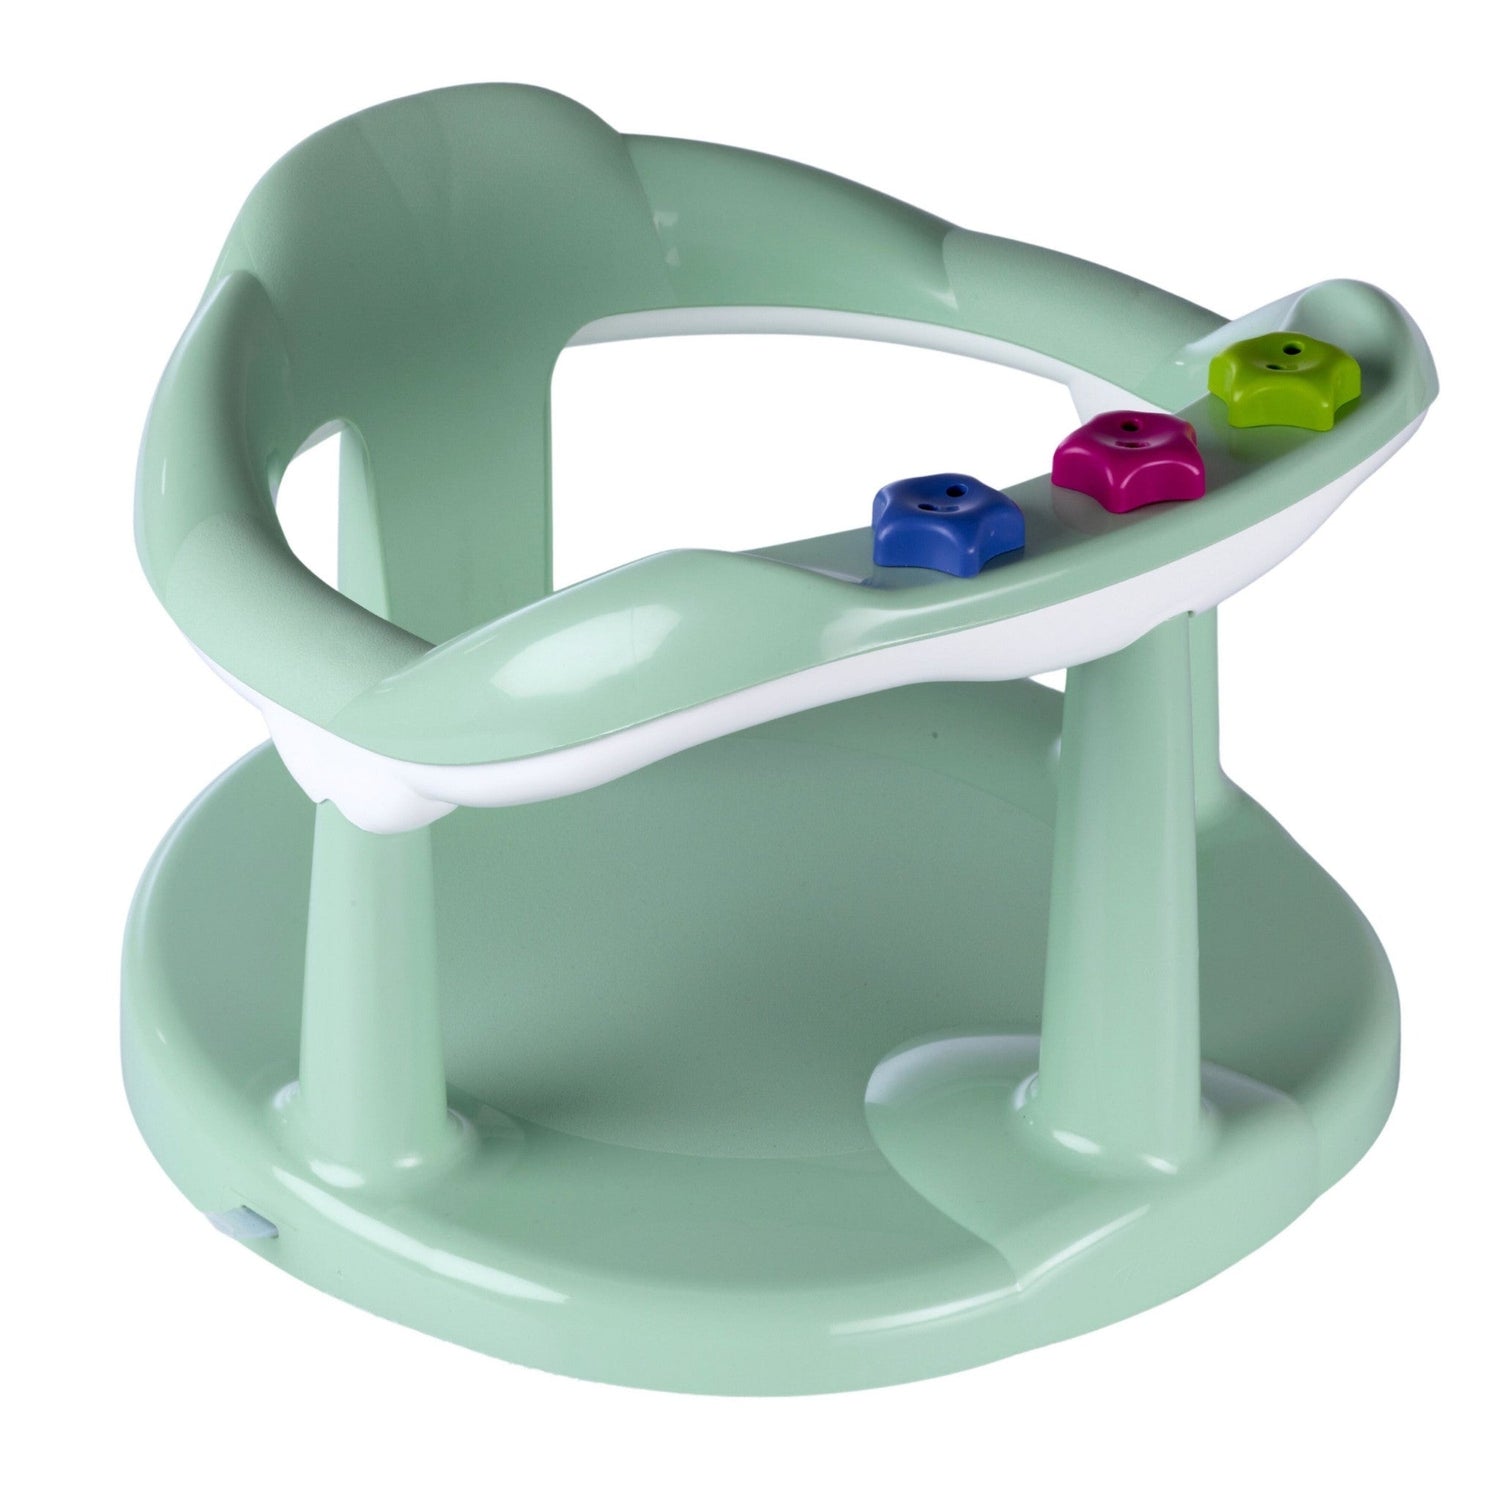 Thermobaby Aquababy Bath Seat